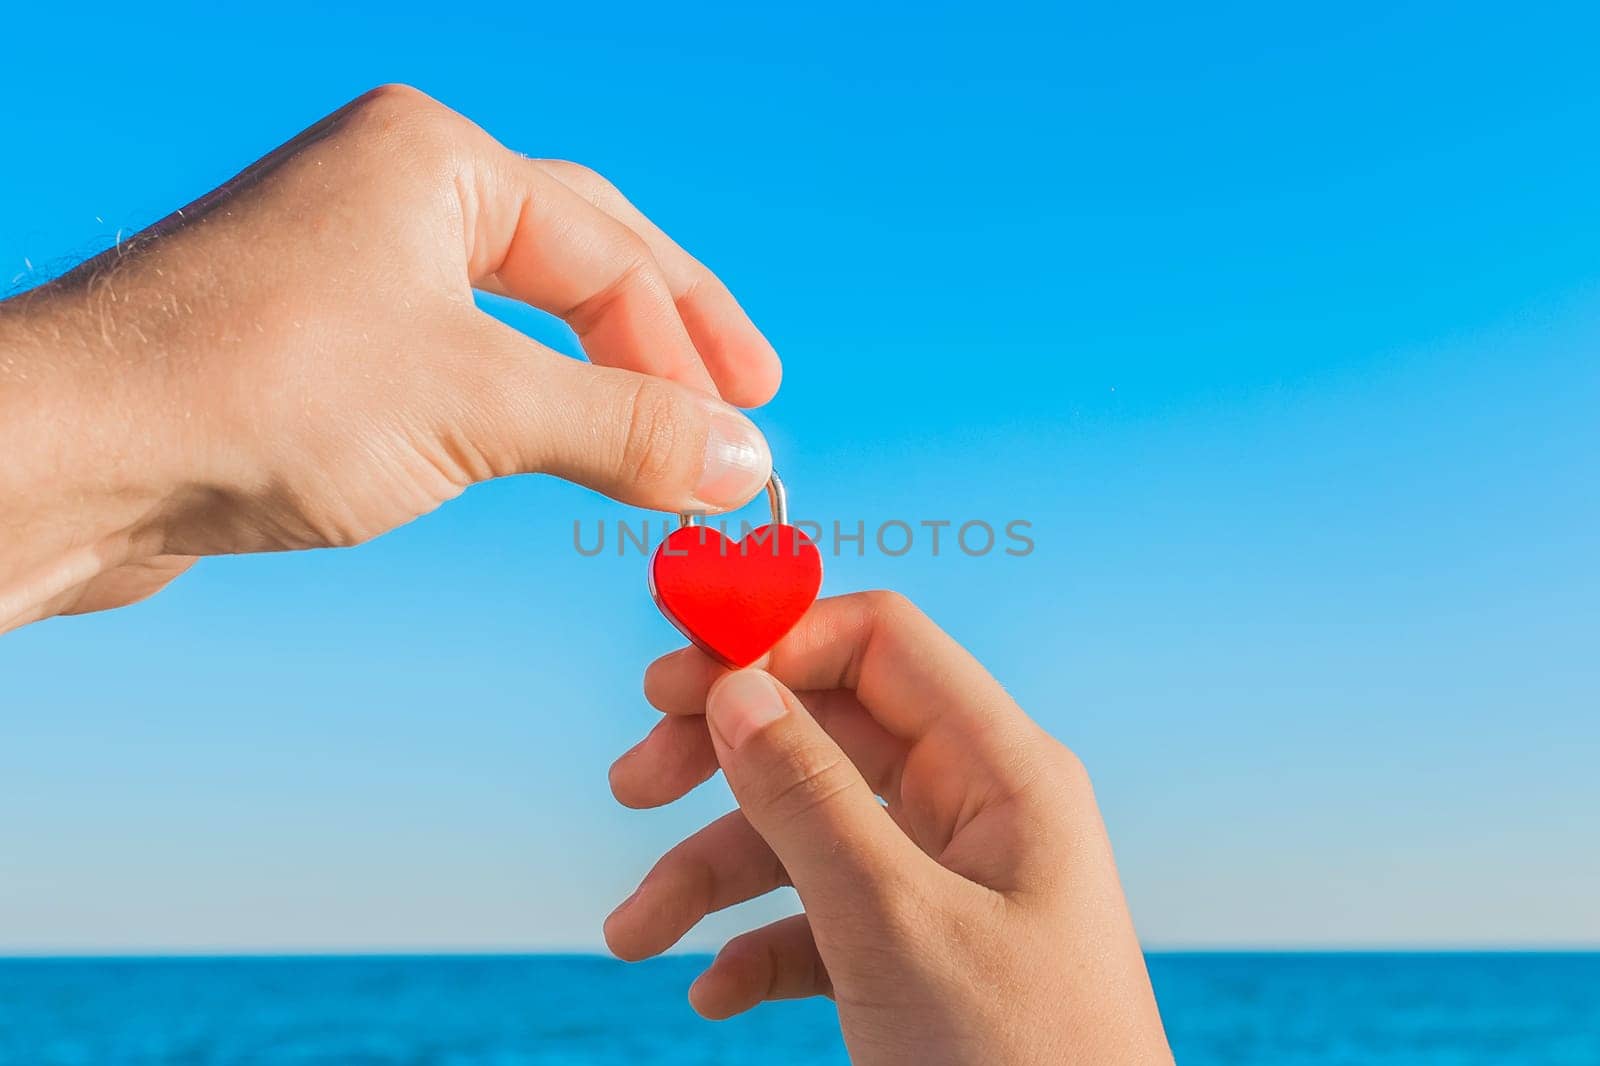 A sign and symbol of love and relationship concept. The hands of a man and a woman hold together a red heart against the blue sea, sky and horizon line by AYDO8